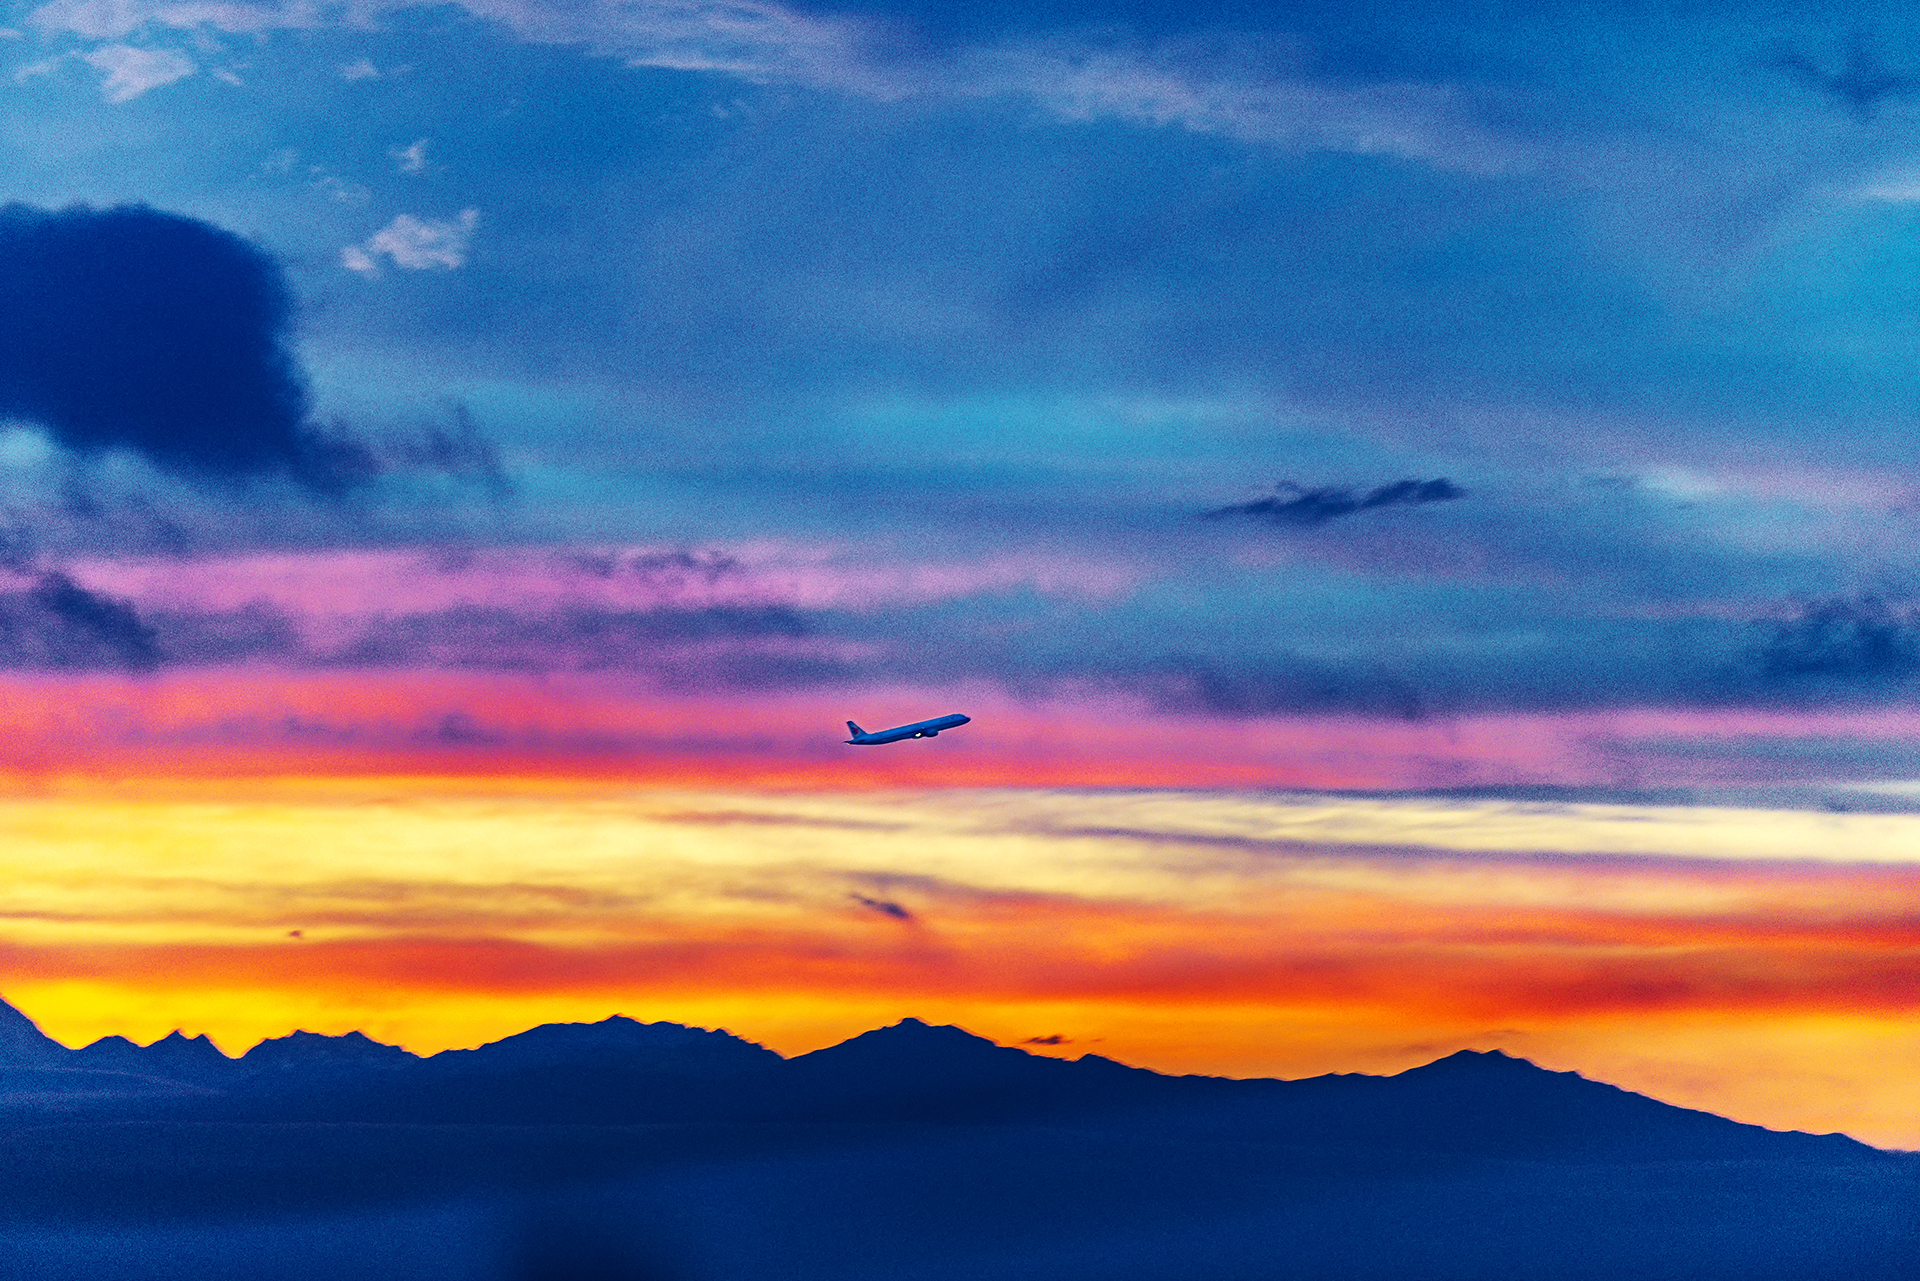 General 1920x1281 scenery Sichuan sunset airplane low light